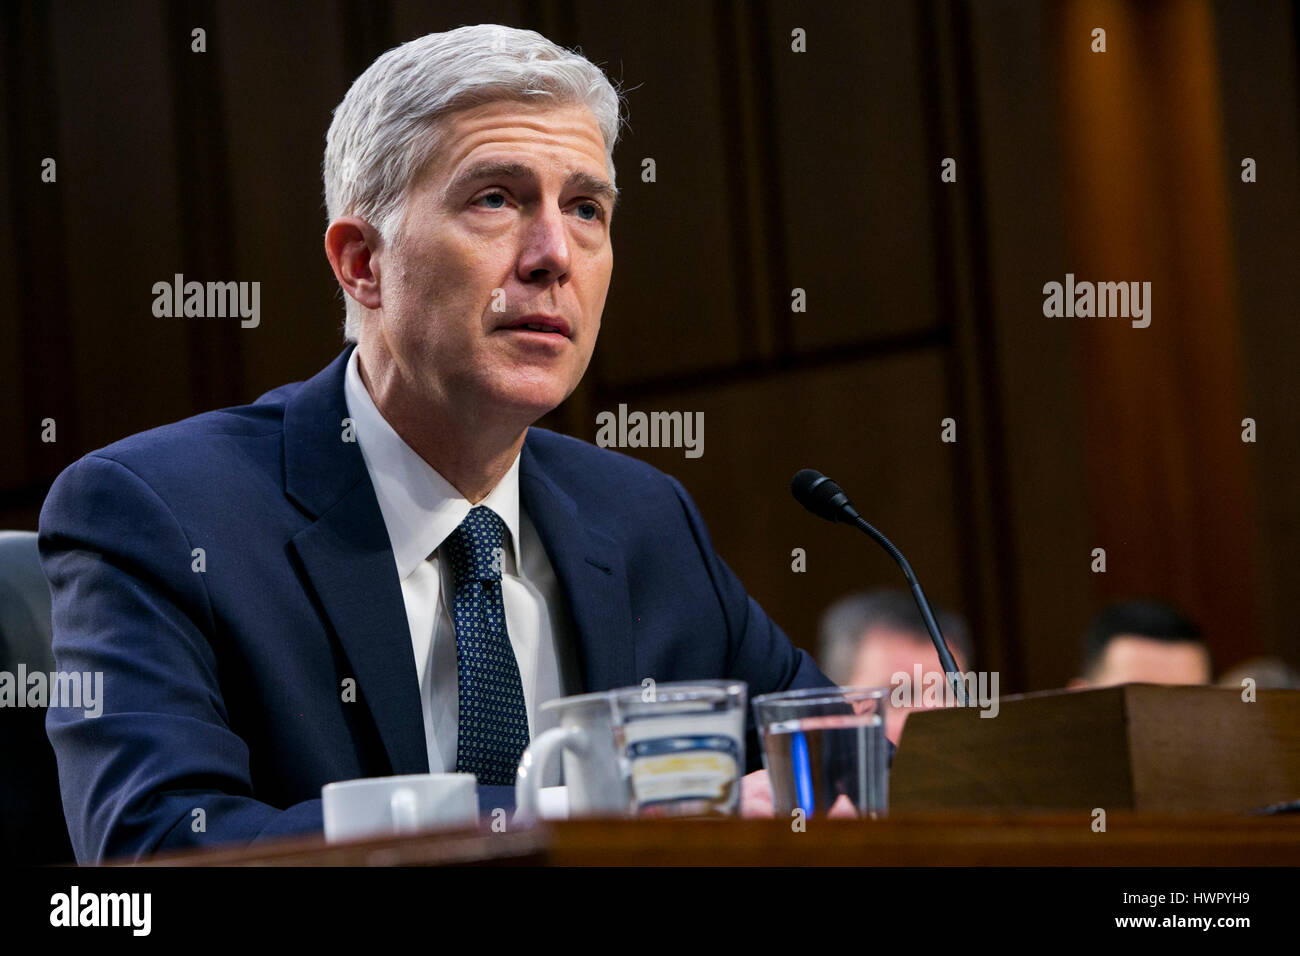 Washington, USA. 22nd Mar, 2017. Judge Neil Gorsuch testifies during his Supreme Court confirmation hearing before the Senate Judiciary Committee in Washington, D.C., on March 22, 2017. Gorsuch was nominated by President Donald Trump to fill the vacancy left on the court by the death of Justice Antonin Scalia. Credit: Kristoffer Tripplaar/Alamy Live News Stock Photo